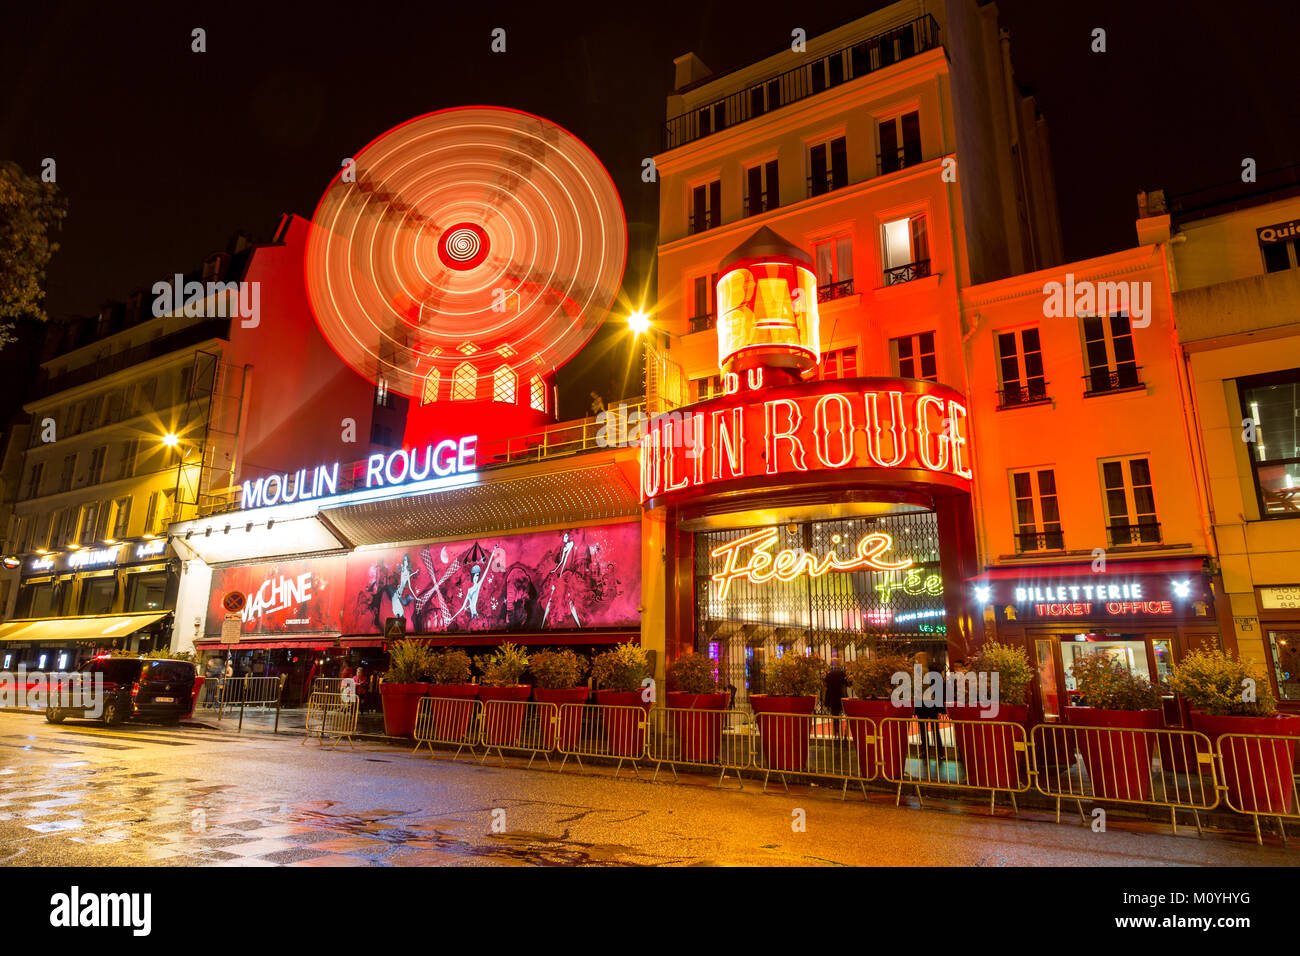 Variety Theatre Moulin Rouge by night,Montmartre,Paris,France Stock Photo